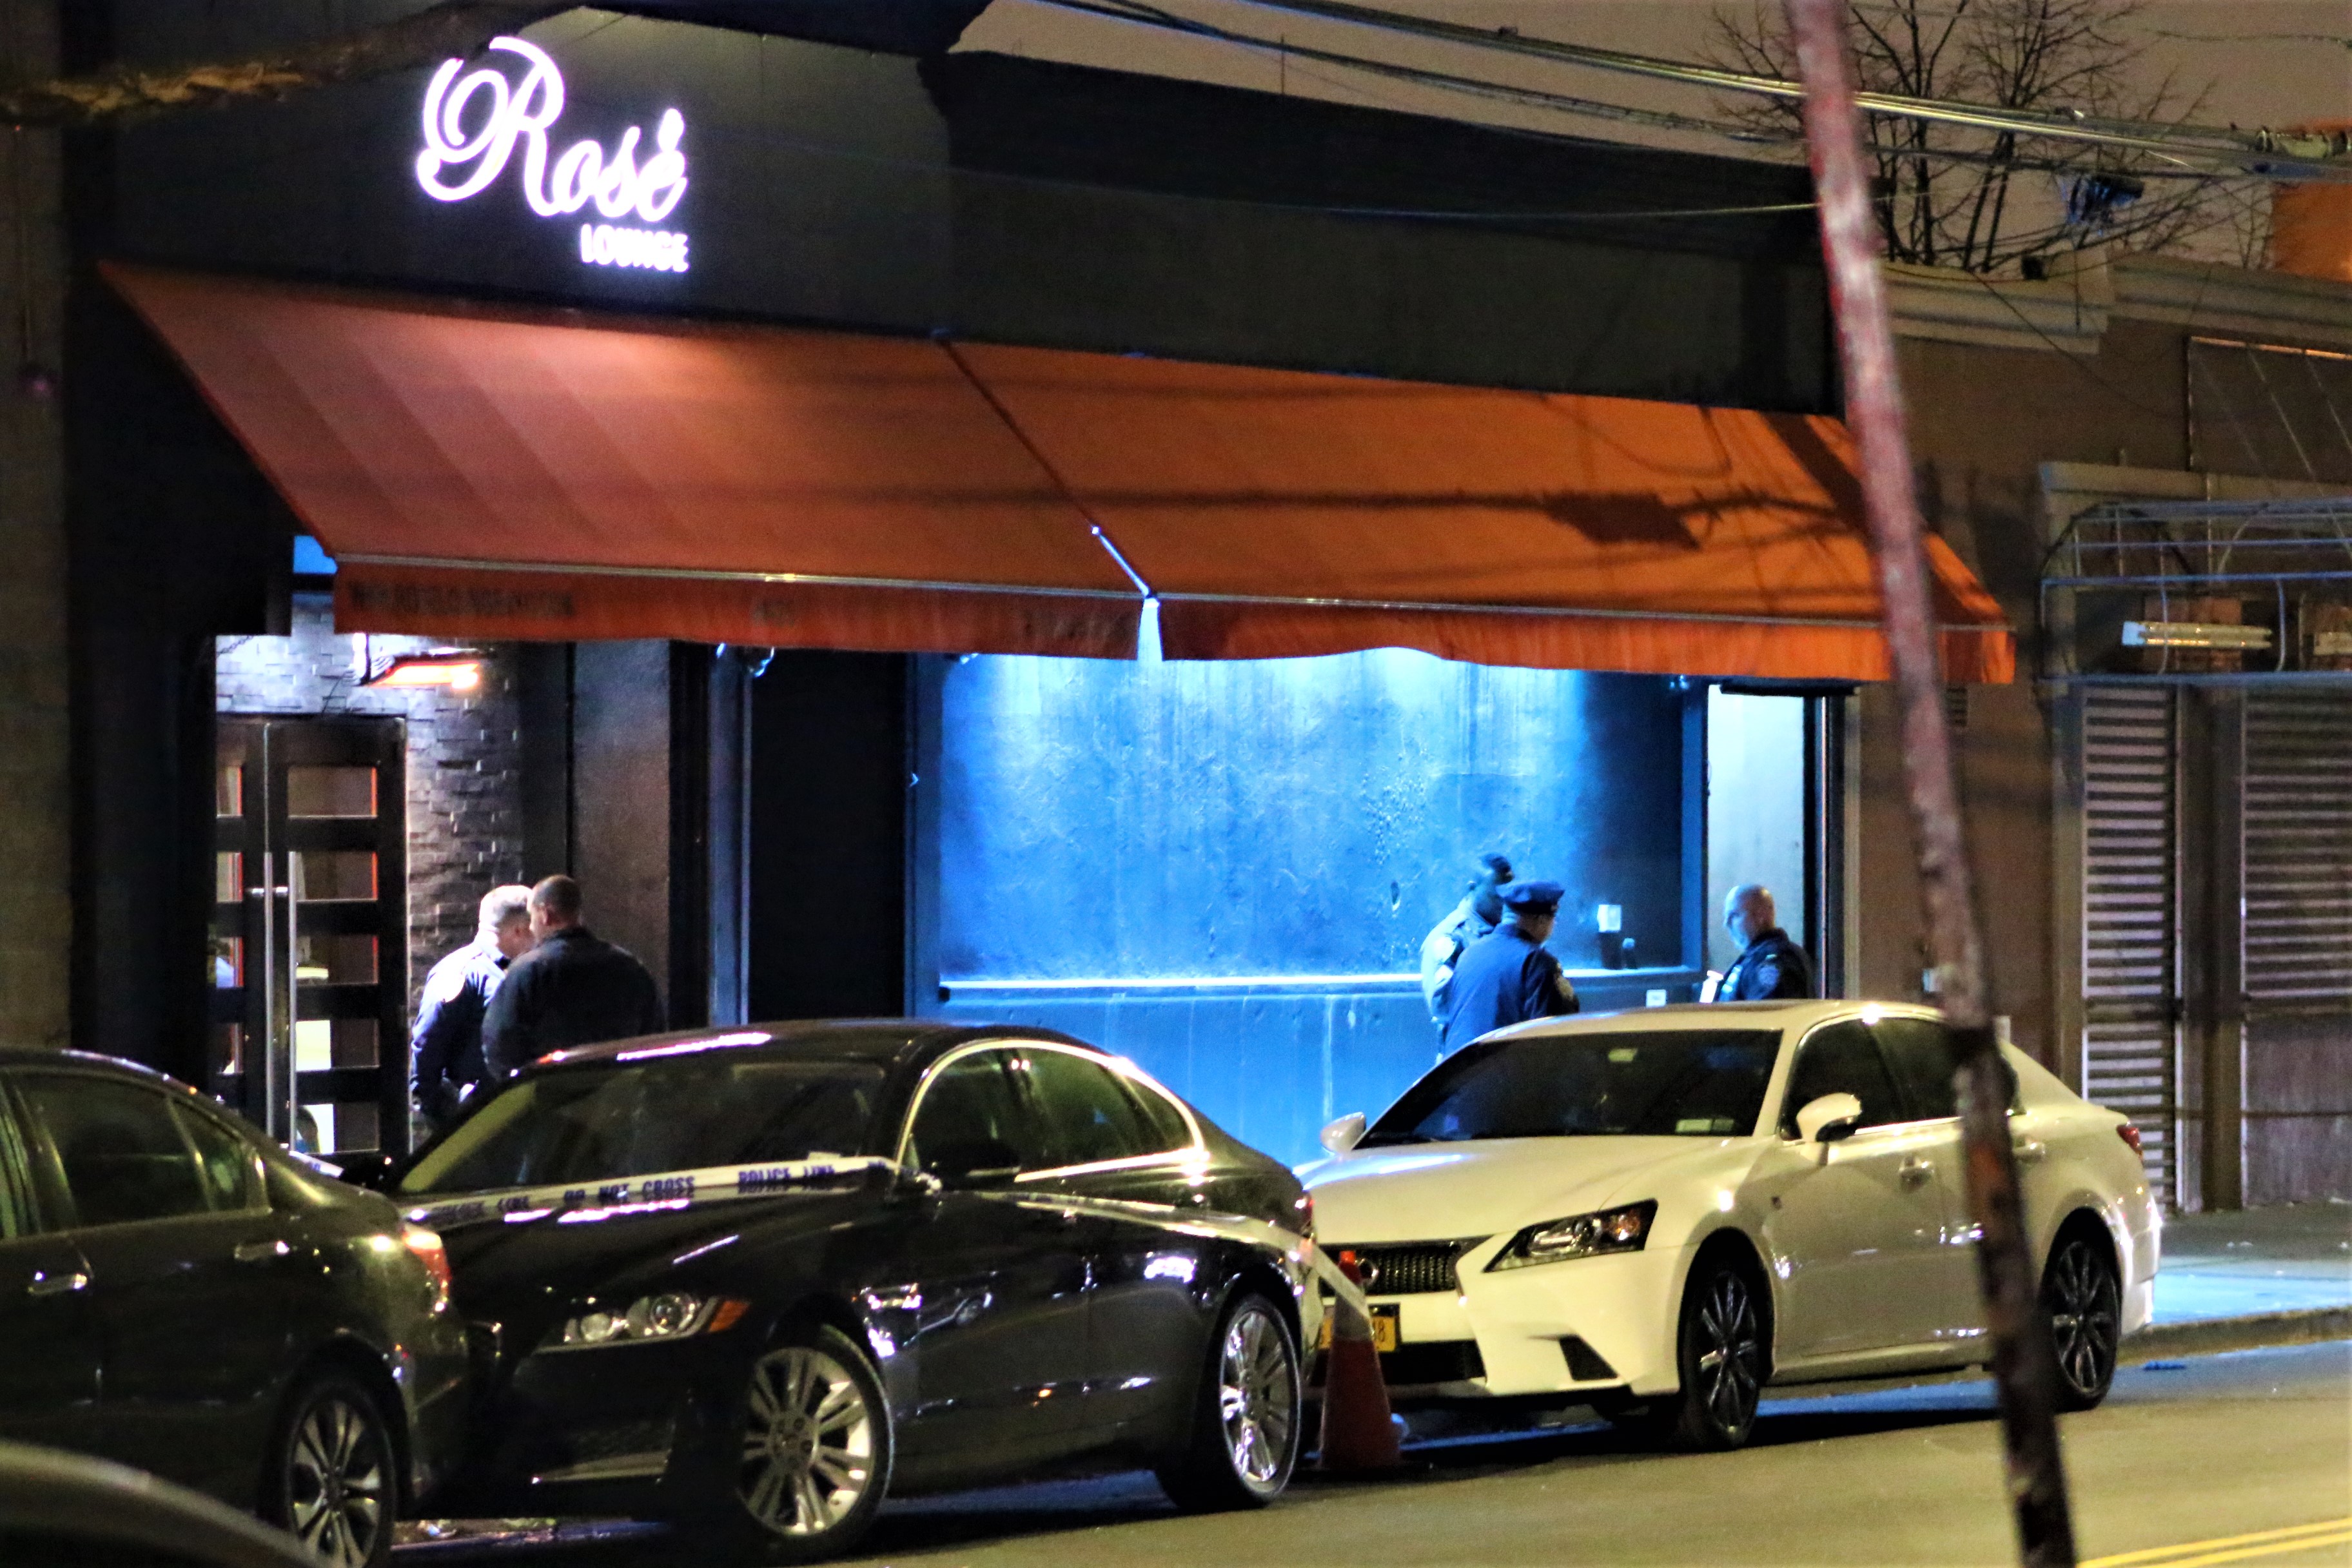 Police outside the Rose Lounge on April 15.